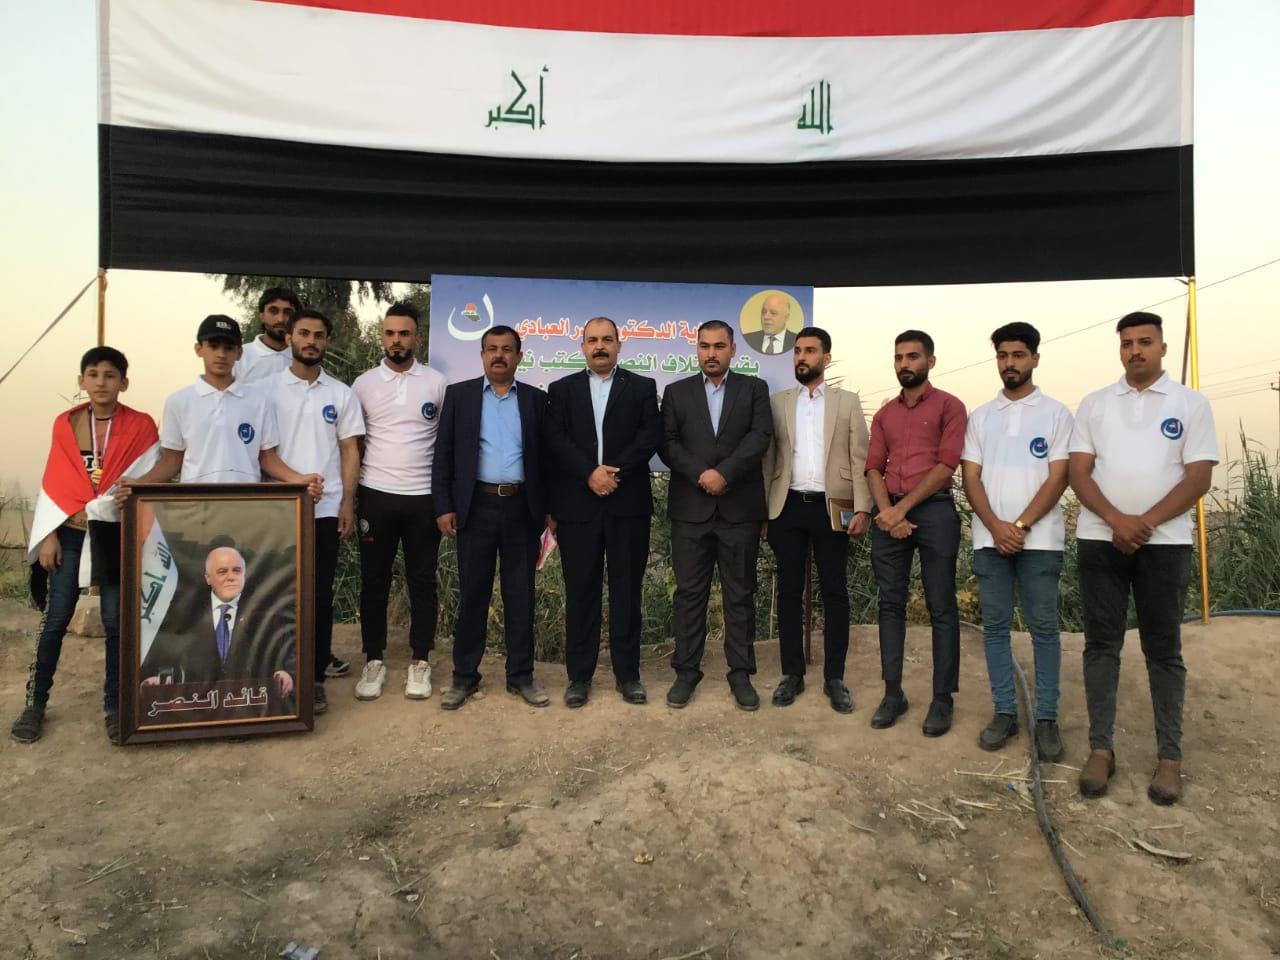 Under the patronage of Dr. Haider Al-Abadi...   A football league on the occasion of the anniversary